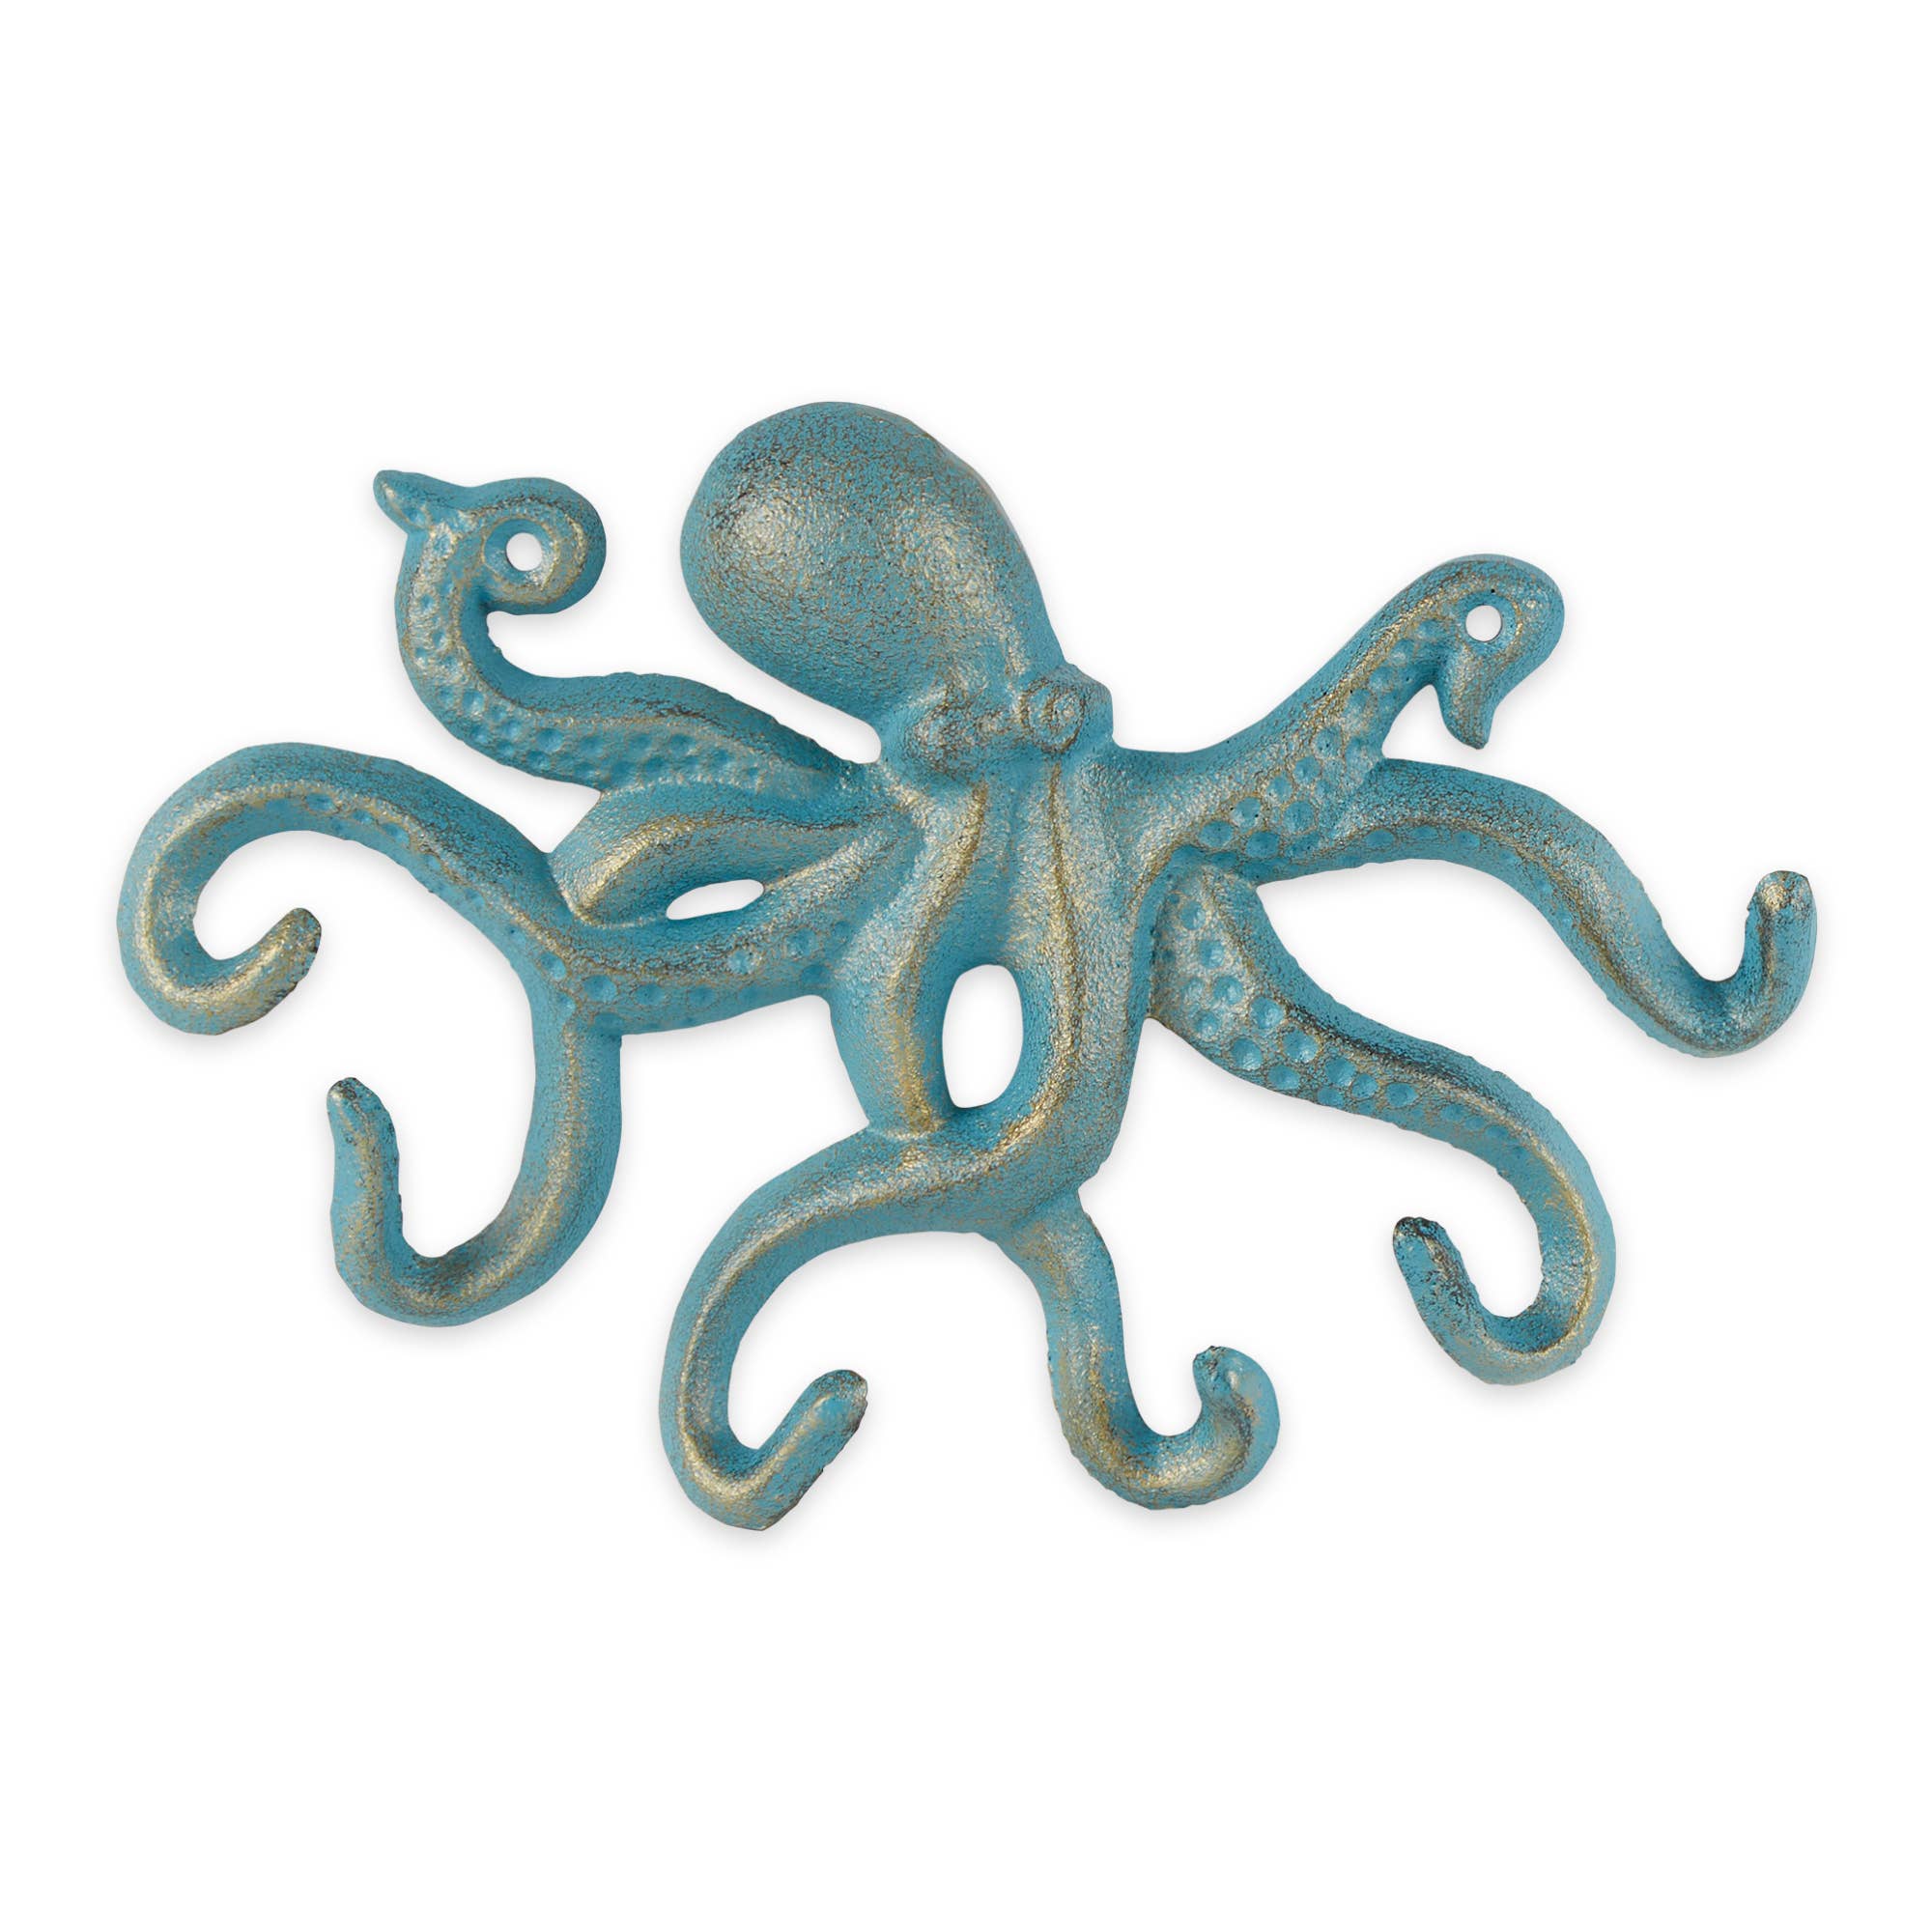 Octopus Wall Hook – The Laughing Crab Gallery